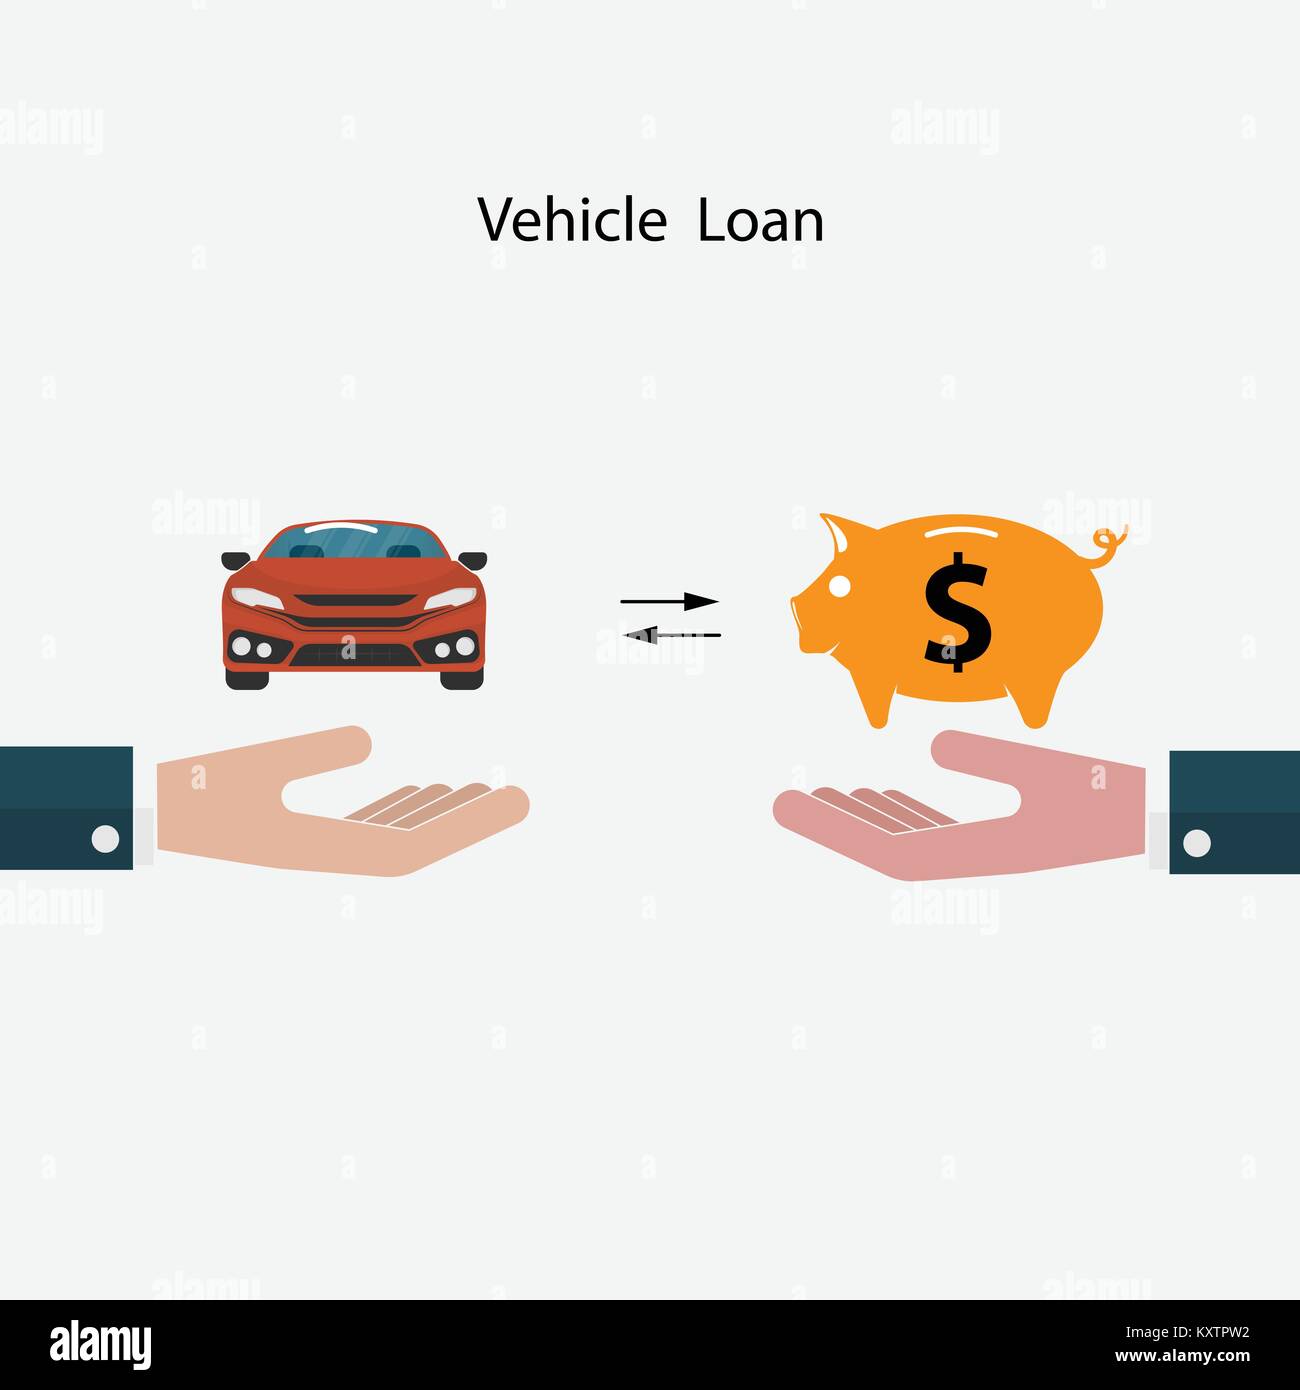 Car icon,Piggy sign and Human hand symbol.Vehicle loan promotion concept.Transport concept.Smart life & Work life balance concept.Vector illustration. Stock Vector